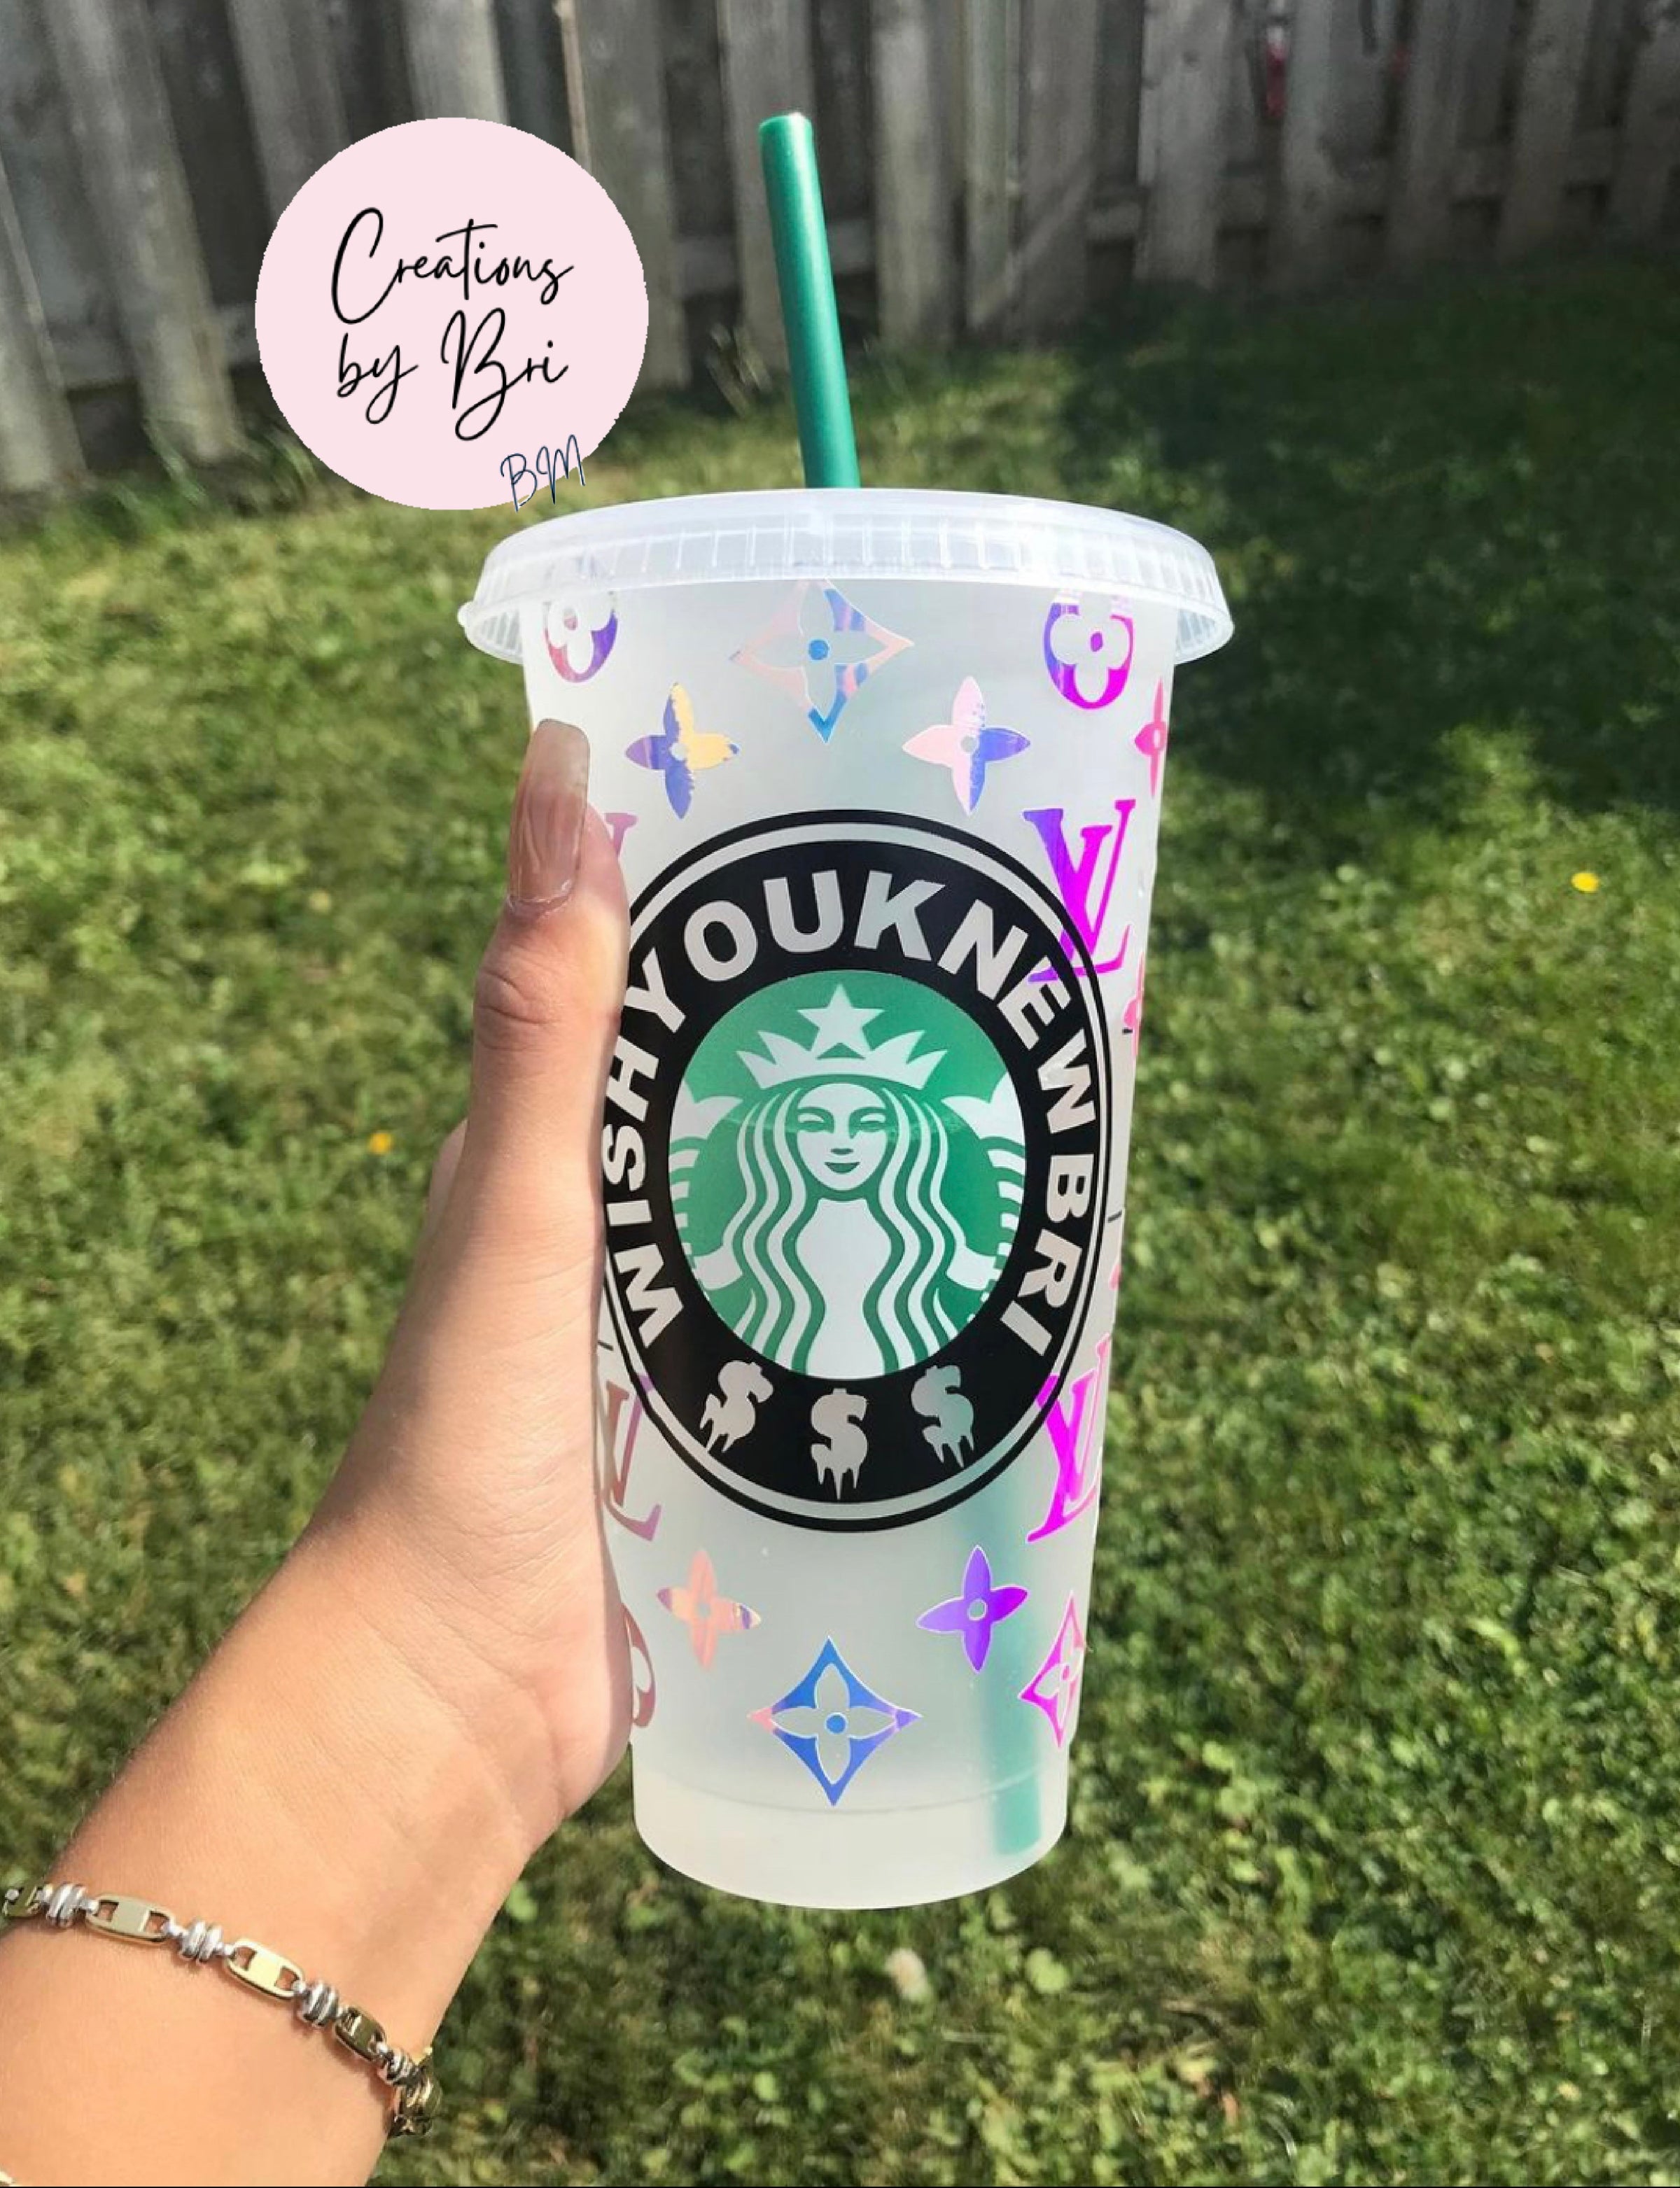 Rose Gold LV Inspired Starbucks Cup  Starbucks cup gift, Starbucks cup  art, Personalized starbucks cup